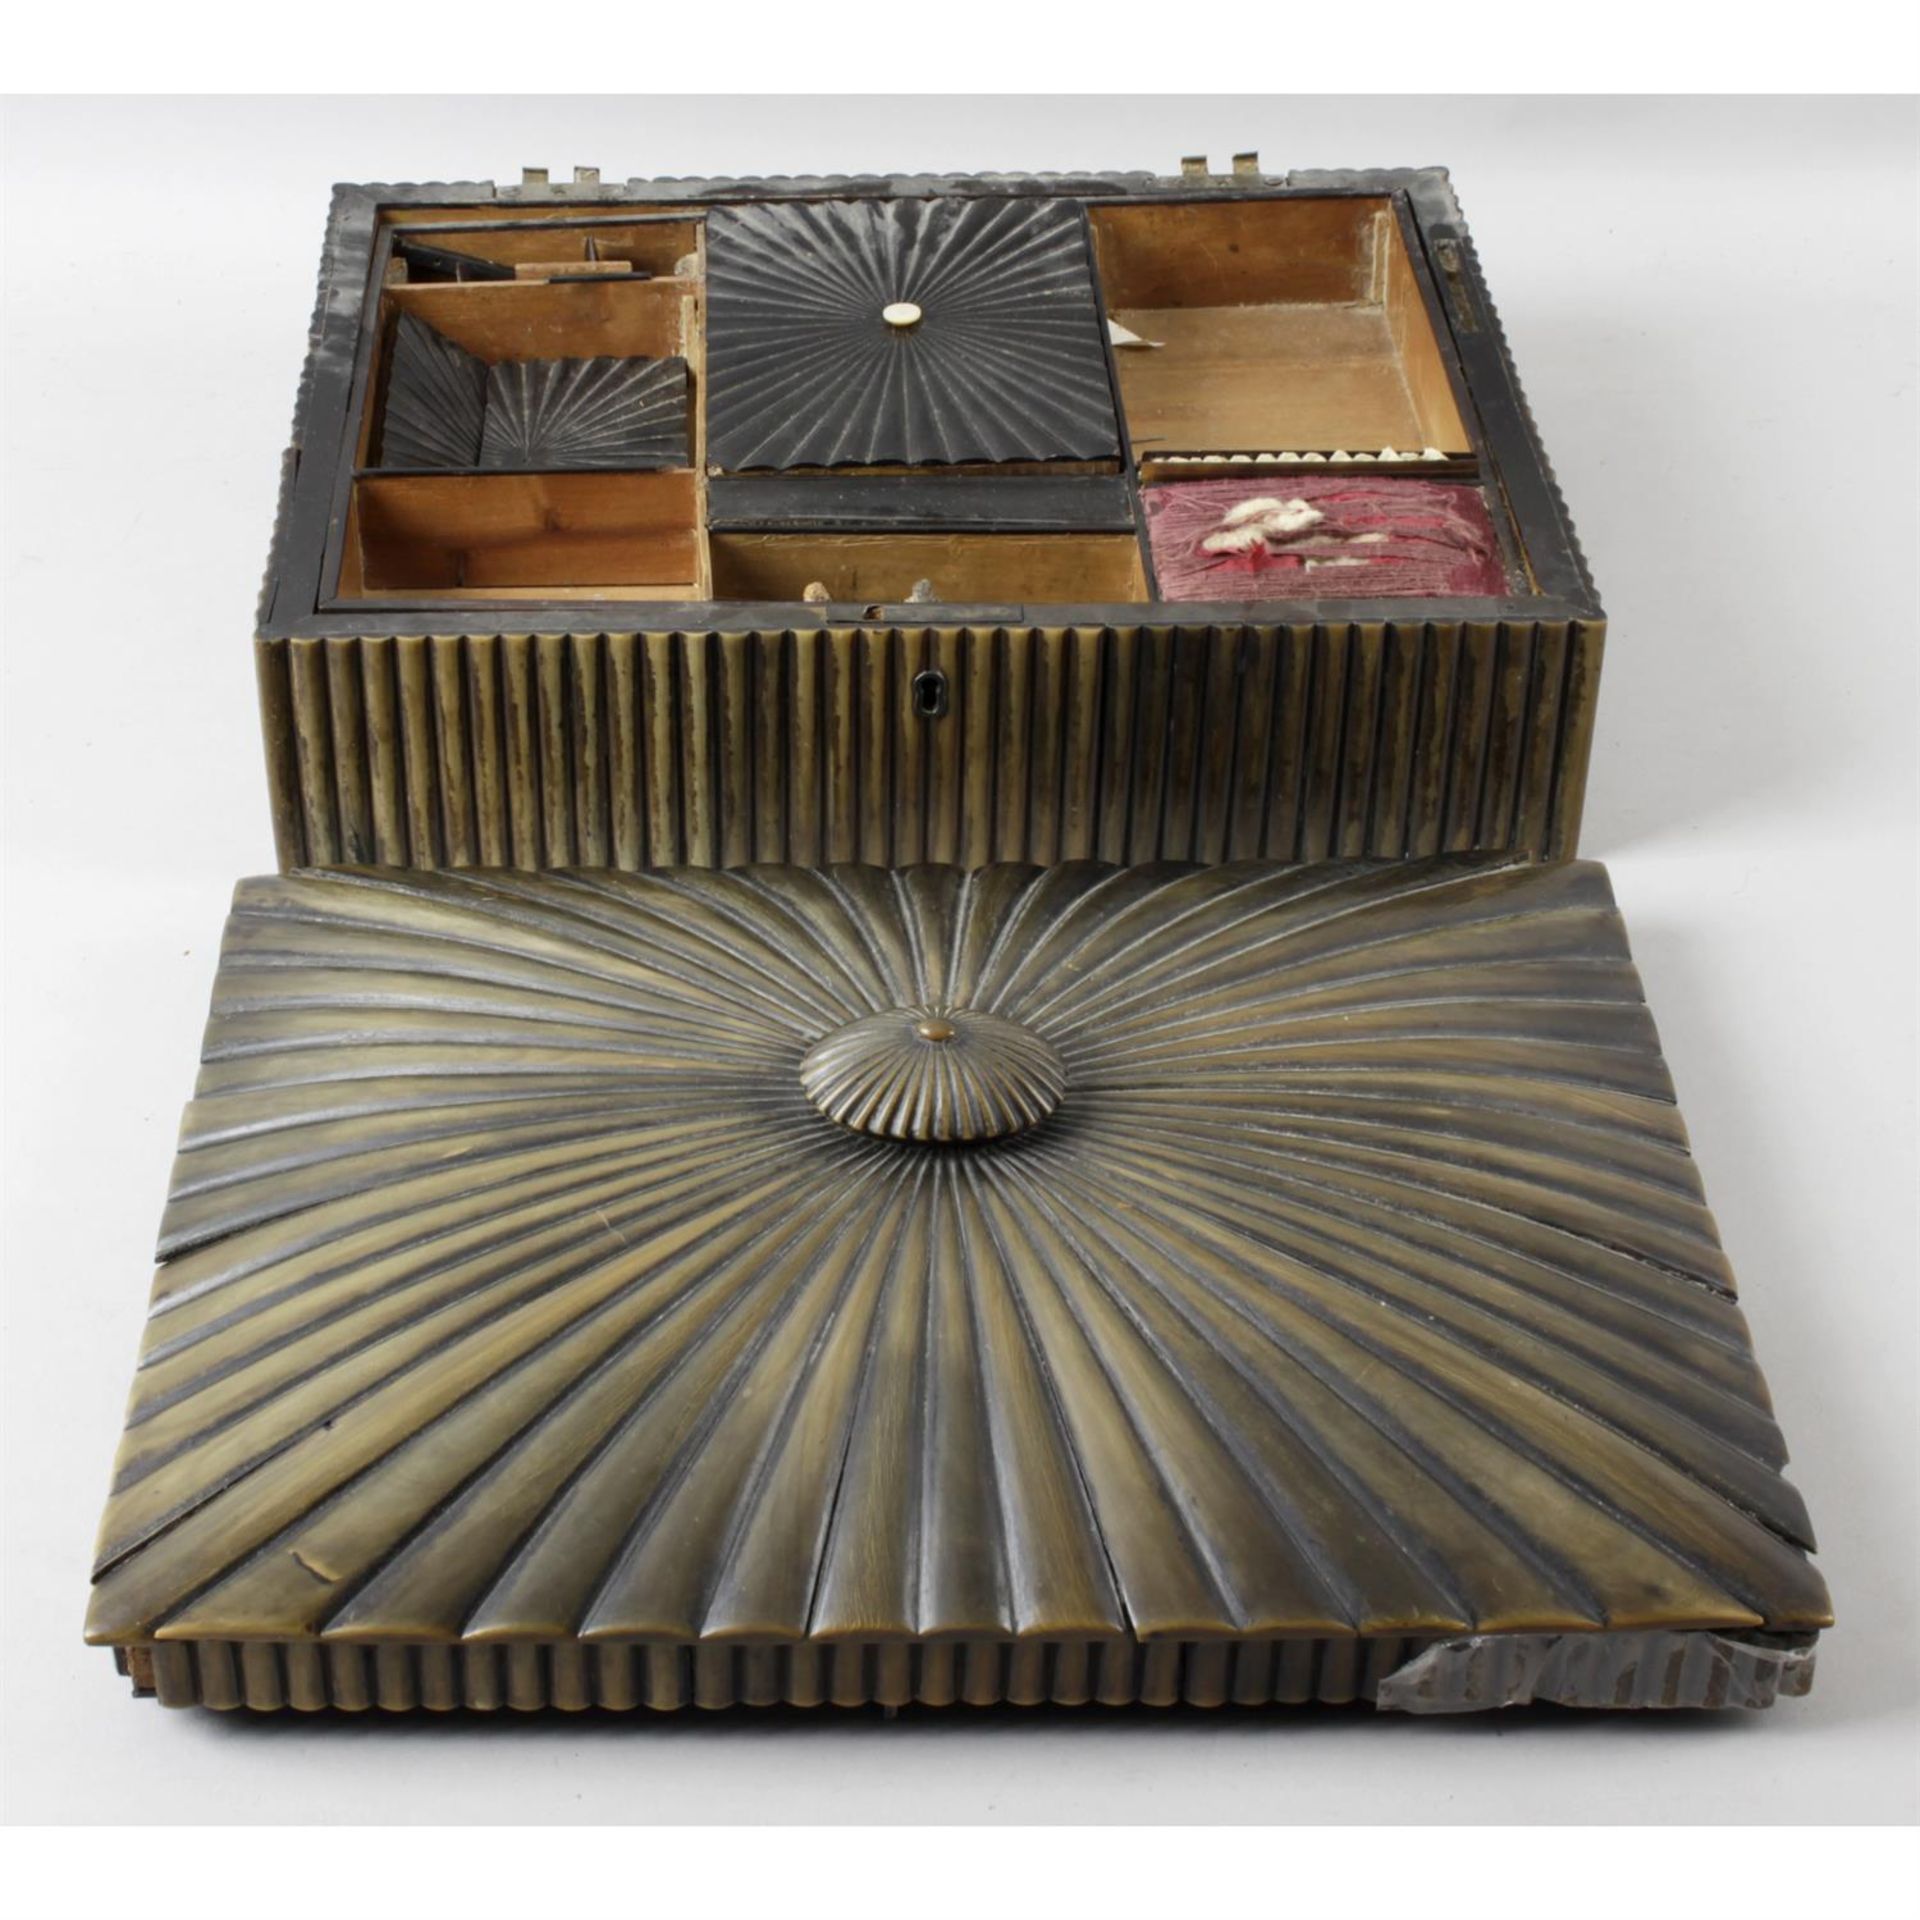 A 19th century Anglo Indian horn veneered ladies work box or sewing box. - Image 2 of 2